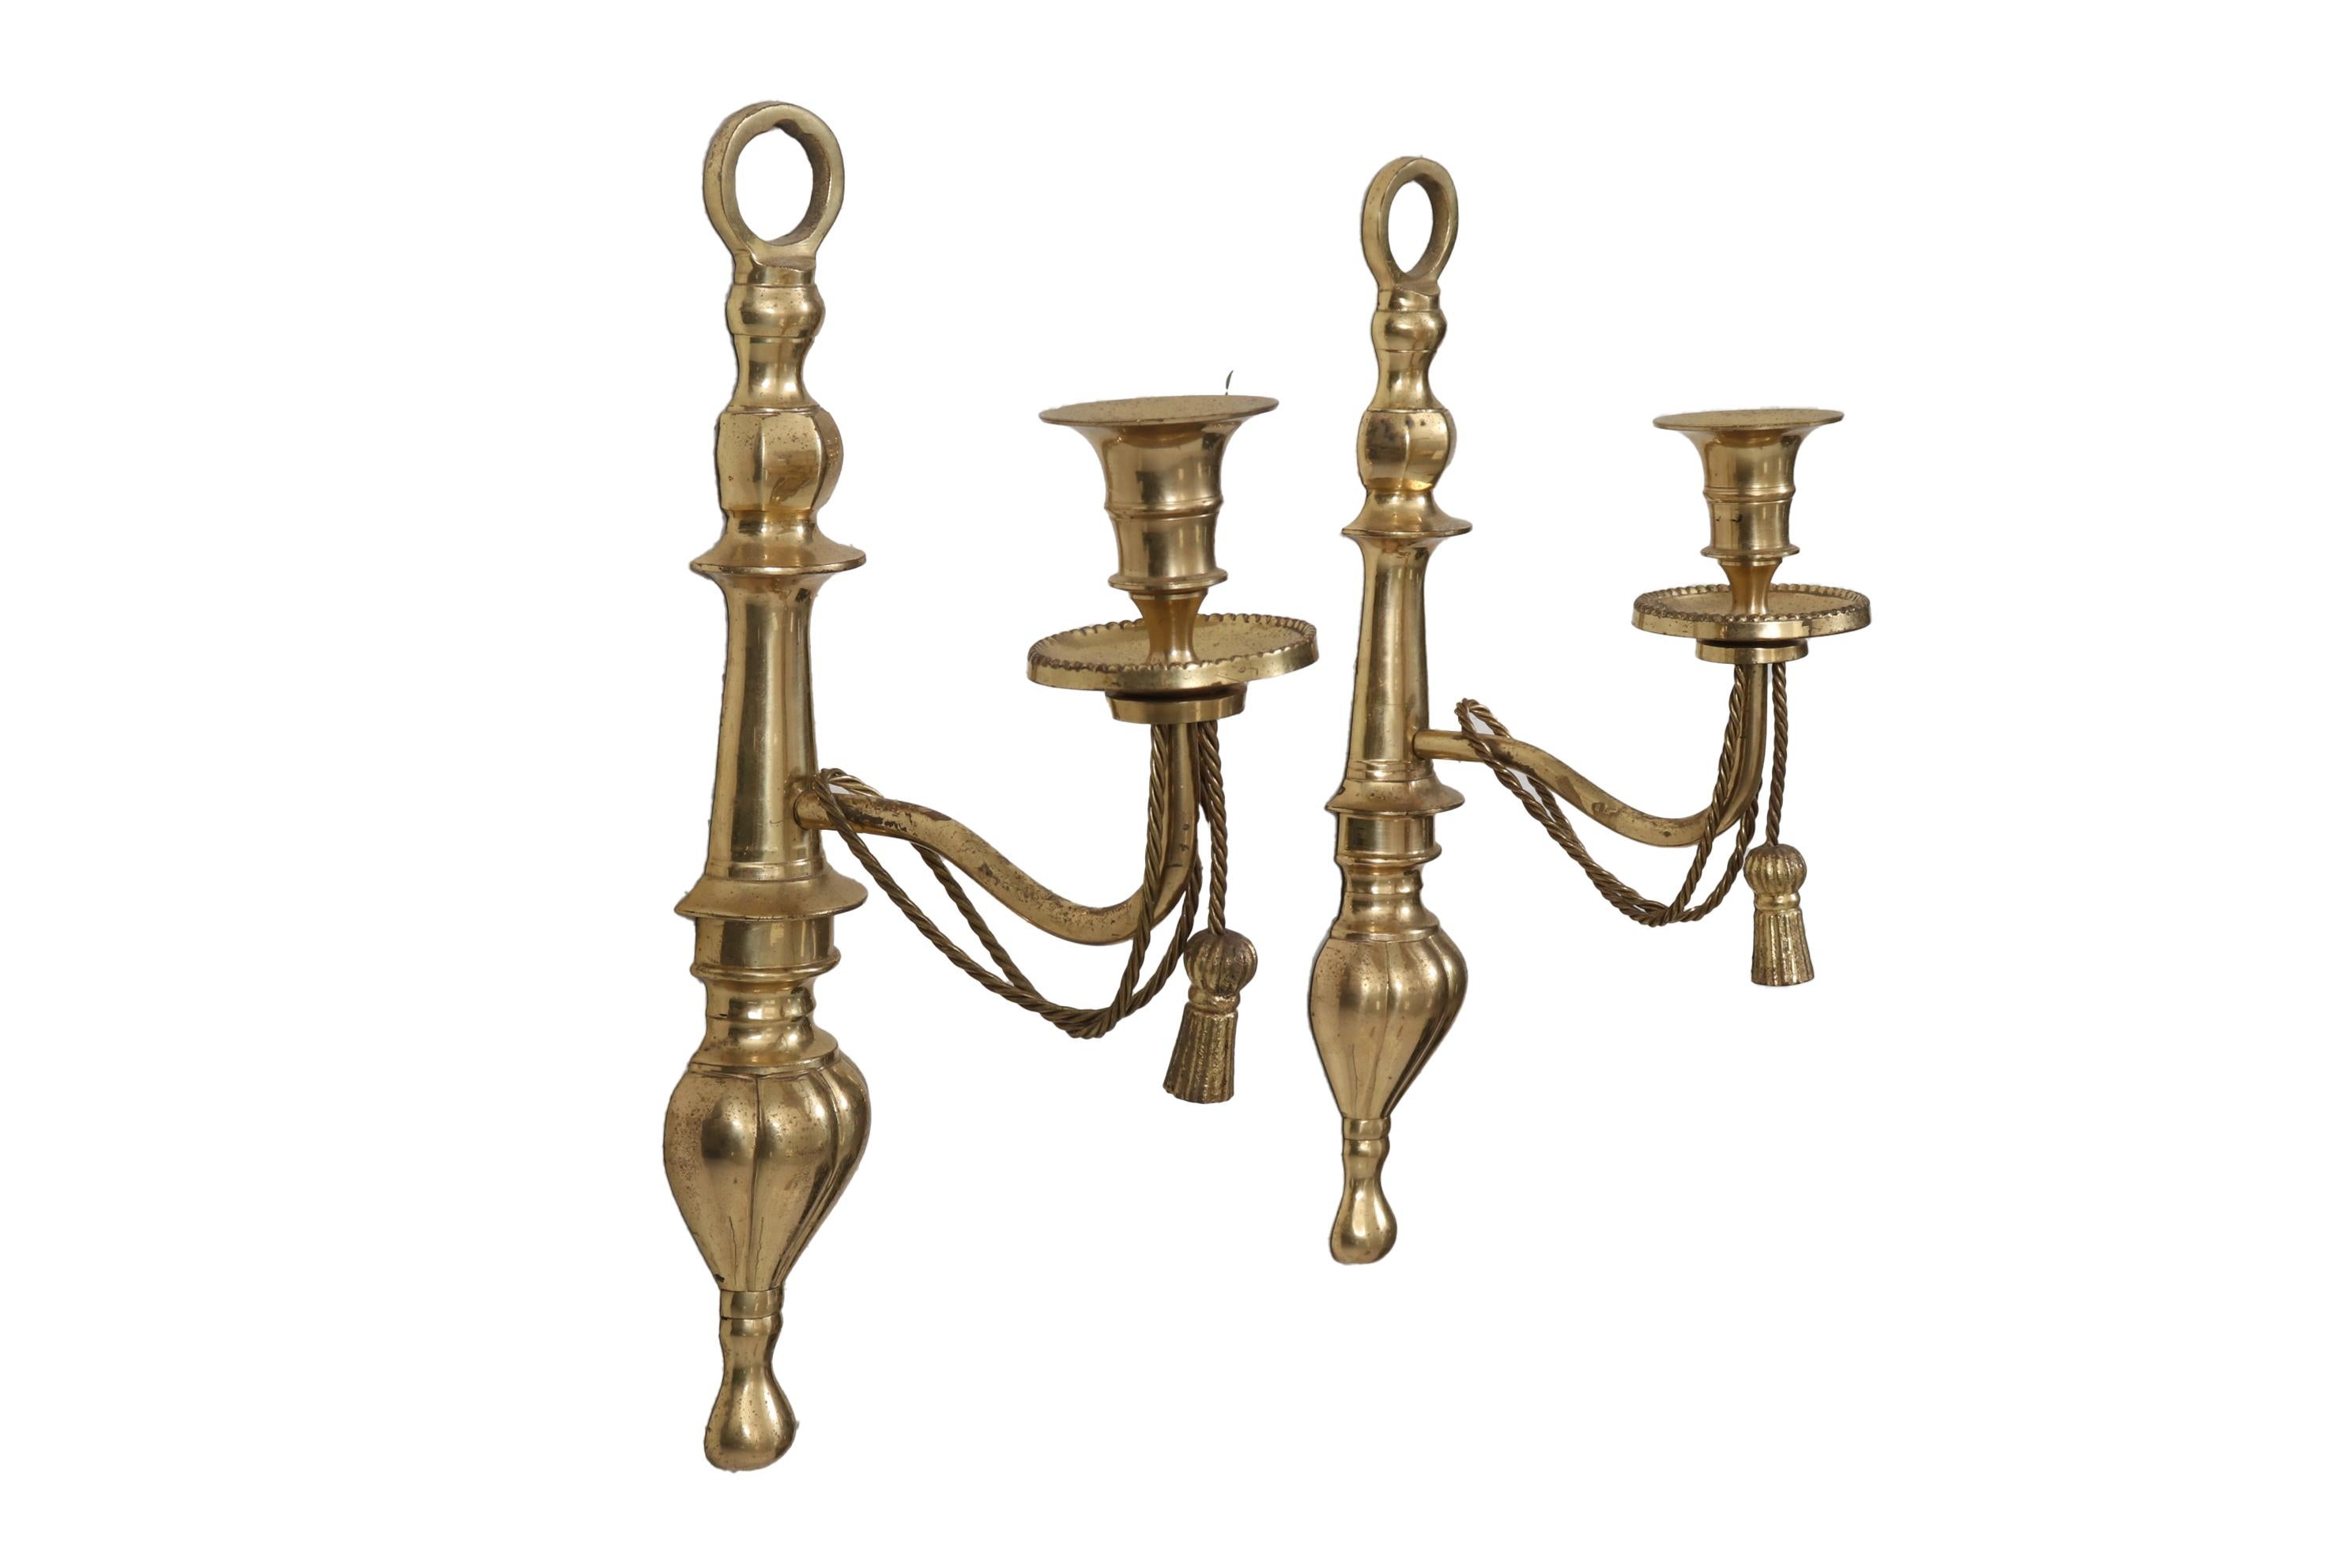 Regency Style Brass Sconces, a Pair In Good Condition For Sale In Bradenton, FL